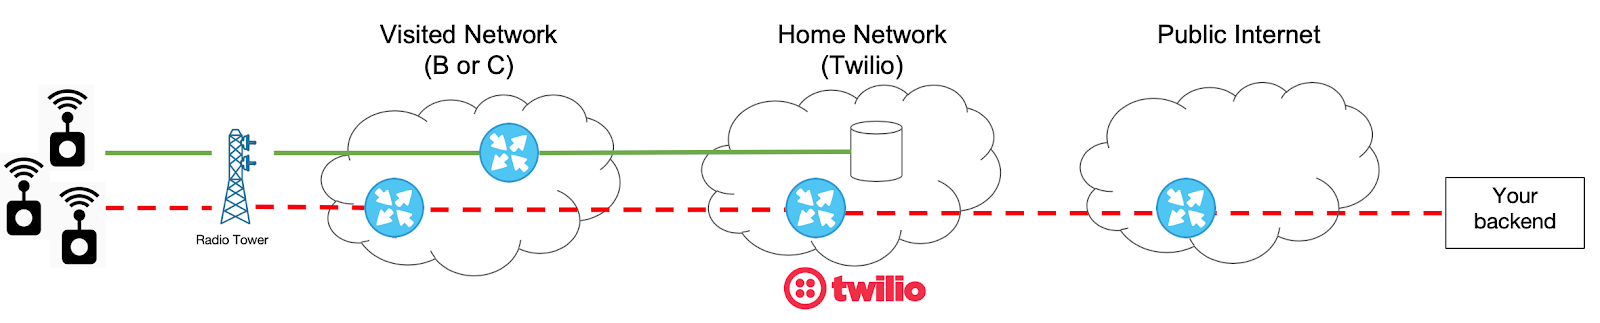 Twilio controlling which cellular network connectivity is possible.